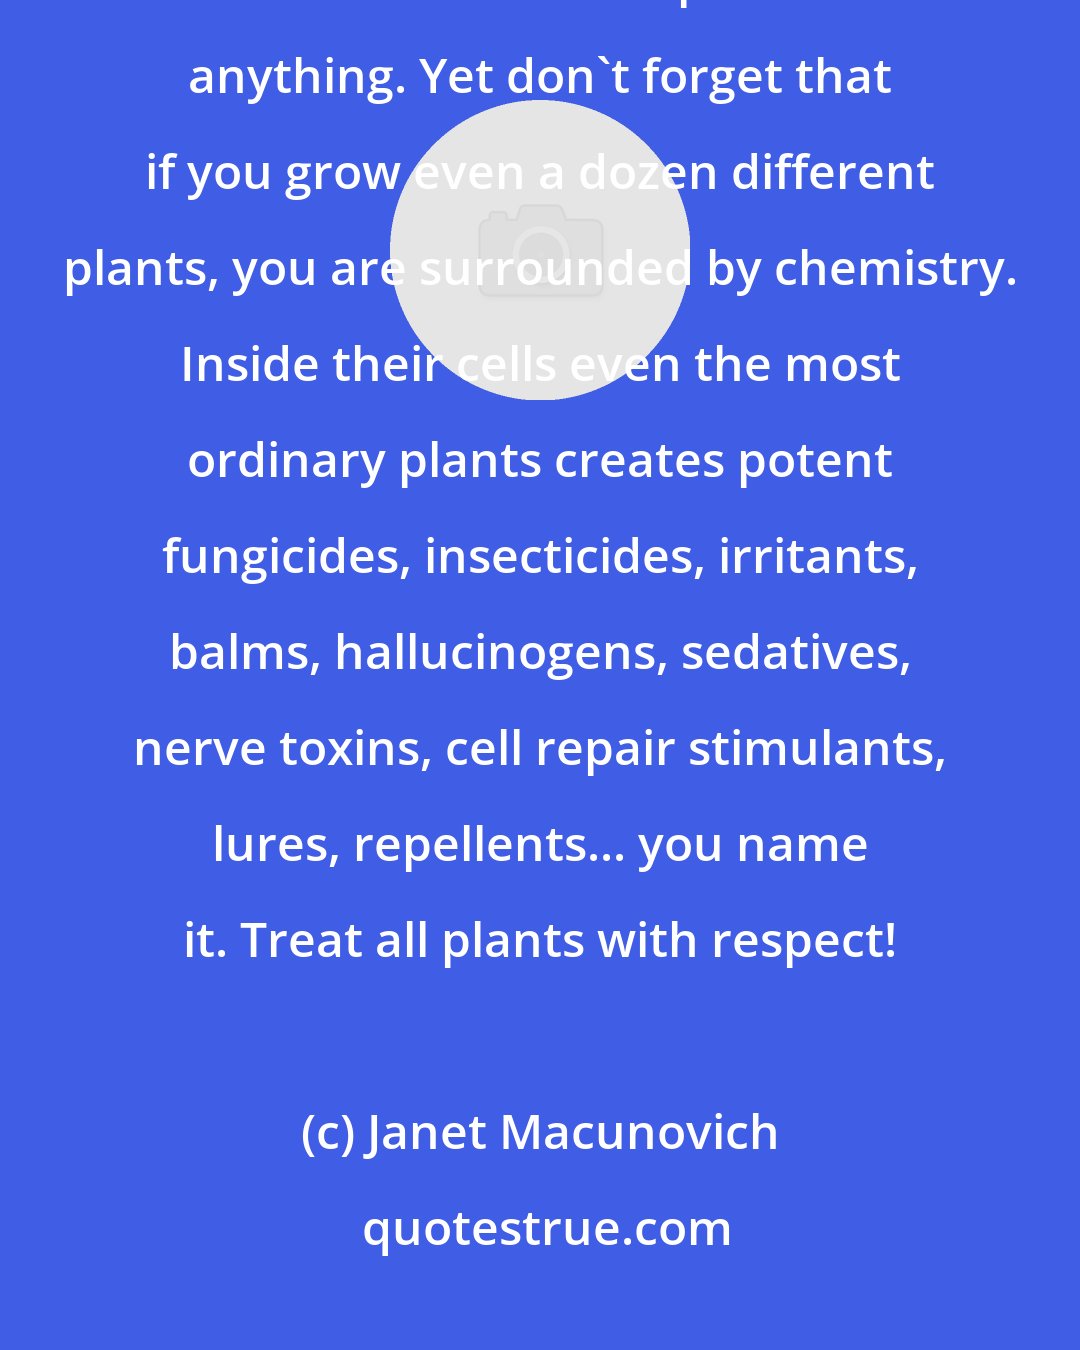 Janet Macunovich: Take care with manufactured chemicals, certainly. Your safety and long term health are more important than anything. Yet don't forget that if you grow even a dozen different plants, you are surrounded by chemistry. Inside their cells even the most ordinary plants creates potent fungicides, insecticides, irritants, balms, hallucinogens, sedatives, nerve toxins, cell repair stimulants, lures, repellents... you name it. Treat all plants with respect!